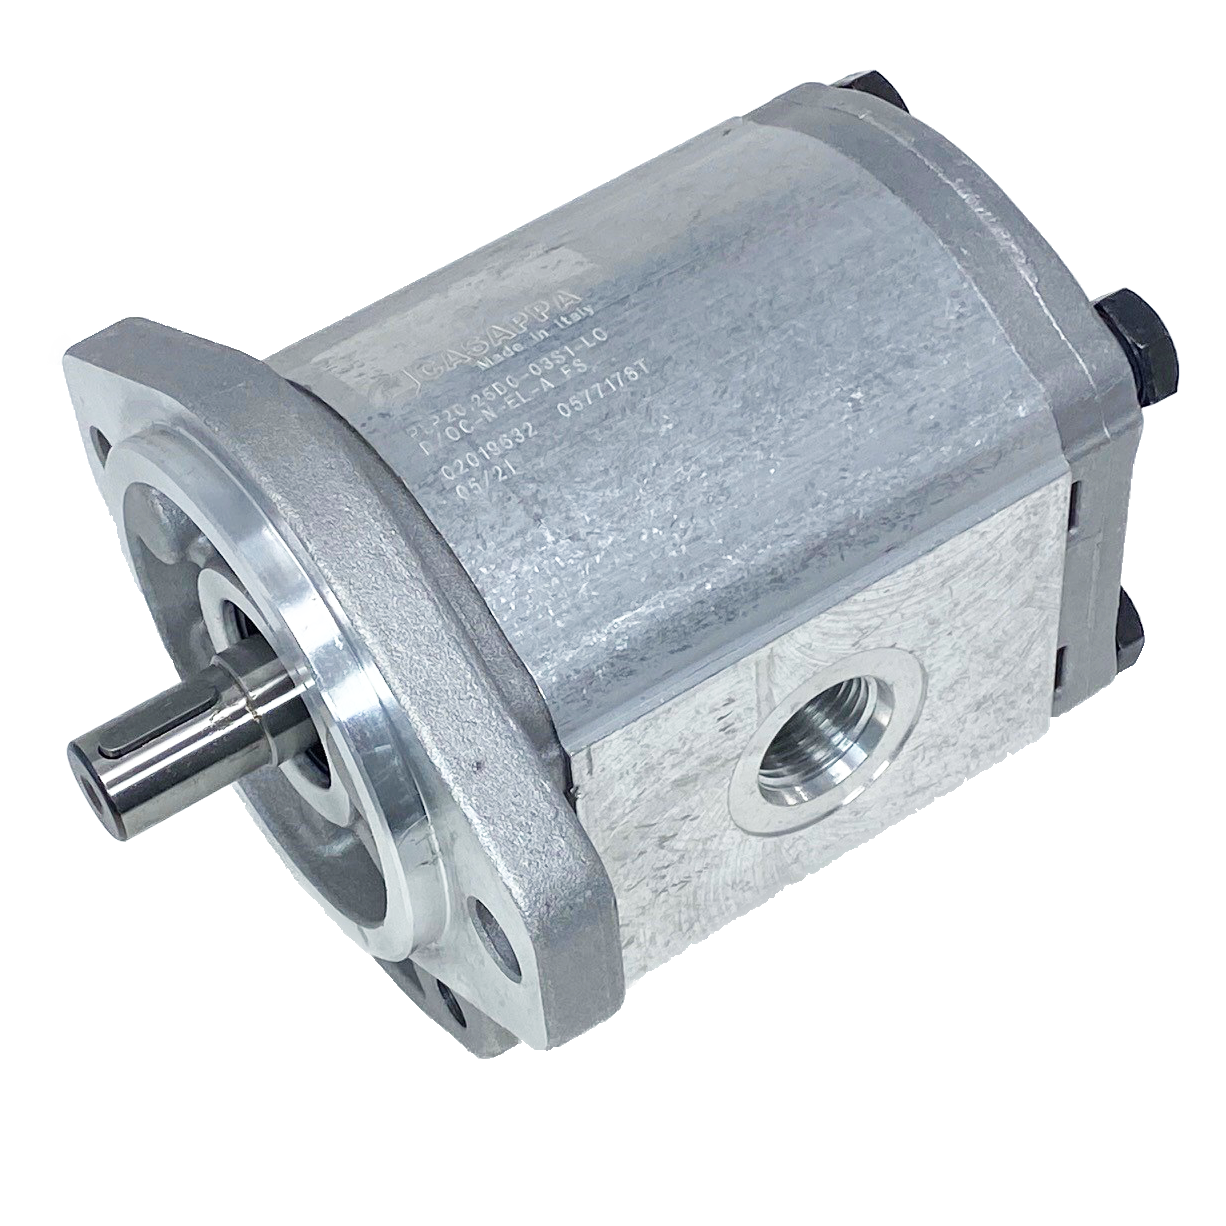 PHM20.27,8B0-31S9-LOC/OG-N-EL : Casappa Polaris Gear Motor, 28.21cc, 2900psi Rated, 2500RPM, Reversible Interior Drain, 5/8" Bore x 5/32" Key Shaft, SAE A 2-Bolt Flange, 0.625 (5/8") #10 SAE Inlet, 1.25" #20 SAE Outlet, Cast Iron Body, Aluminum Flange